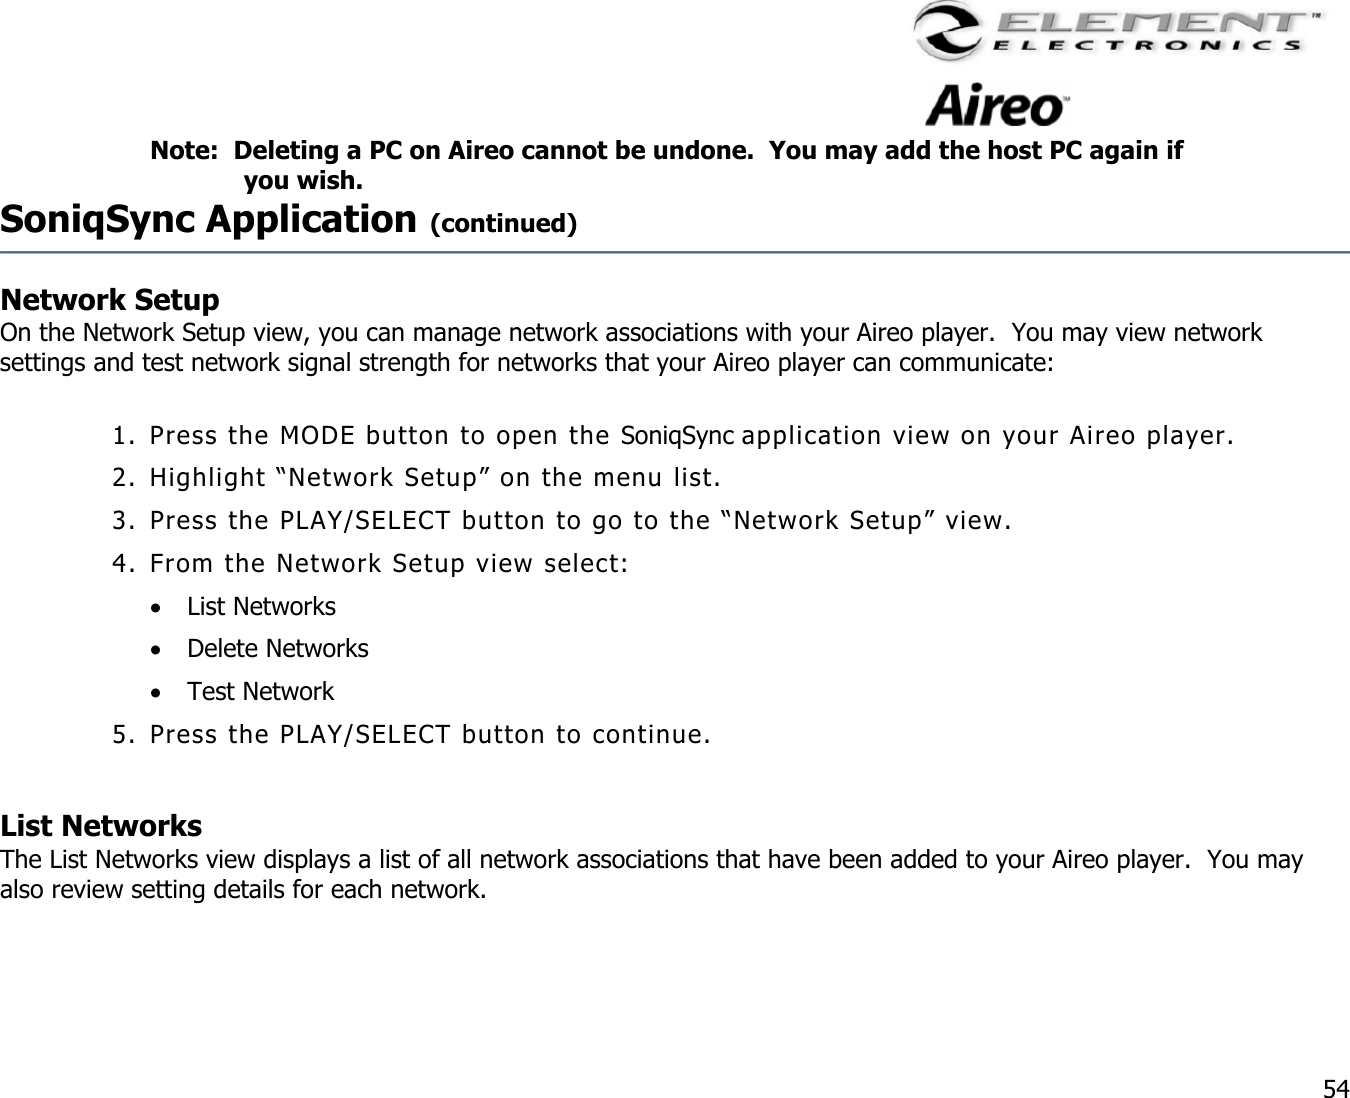                                                                                    54 Note:  Deleting a PC on Aireo cannot be undone.  You may add the host PC again if you wish. SoniqSync Application (continued)  Network Setup     On the Network Setup view, you can manage network associations with your Aireo player.  You may view network settings and test network signal strength for networks that your Aireo player can communicate:   1. Press the MODE button to open the SoniqSync application view on your Aireo player. 2. Highlight “Network Setup” on the menu list. 3. Press the PLAY/SELECT button to go to the “Network Setup” view. 4. From the Network Setup view select: •  List Networks •  Delete Networks •  Test Network 5. Press the PLAY/SELECT button to continue.  List Networks  The List Networks view displays a list of all network associations that have been added to your Aireo player.  You may also review setting details for each network.   